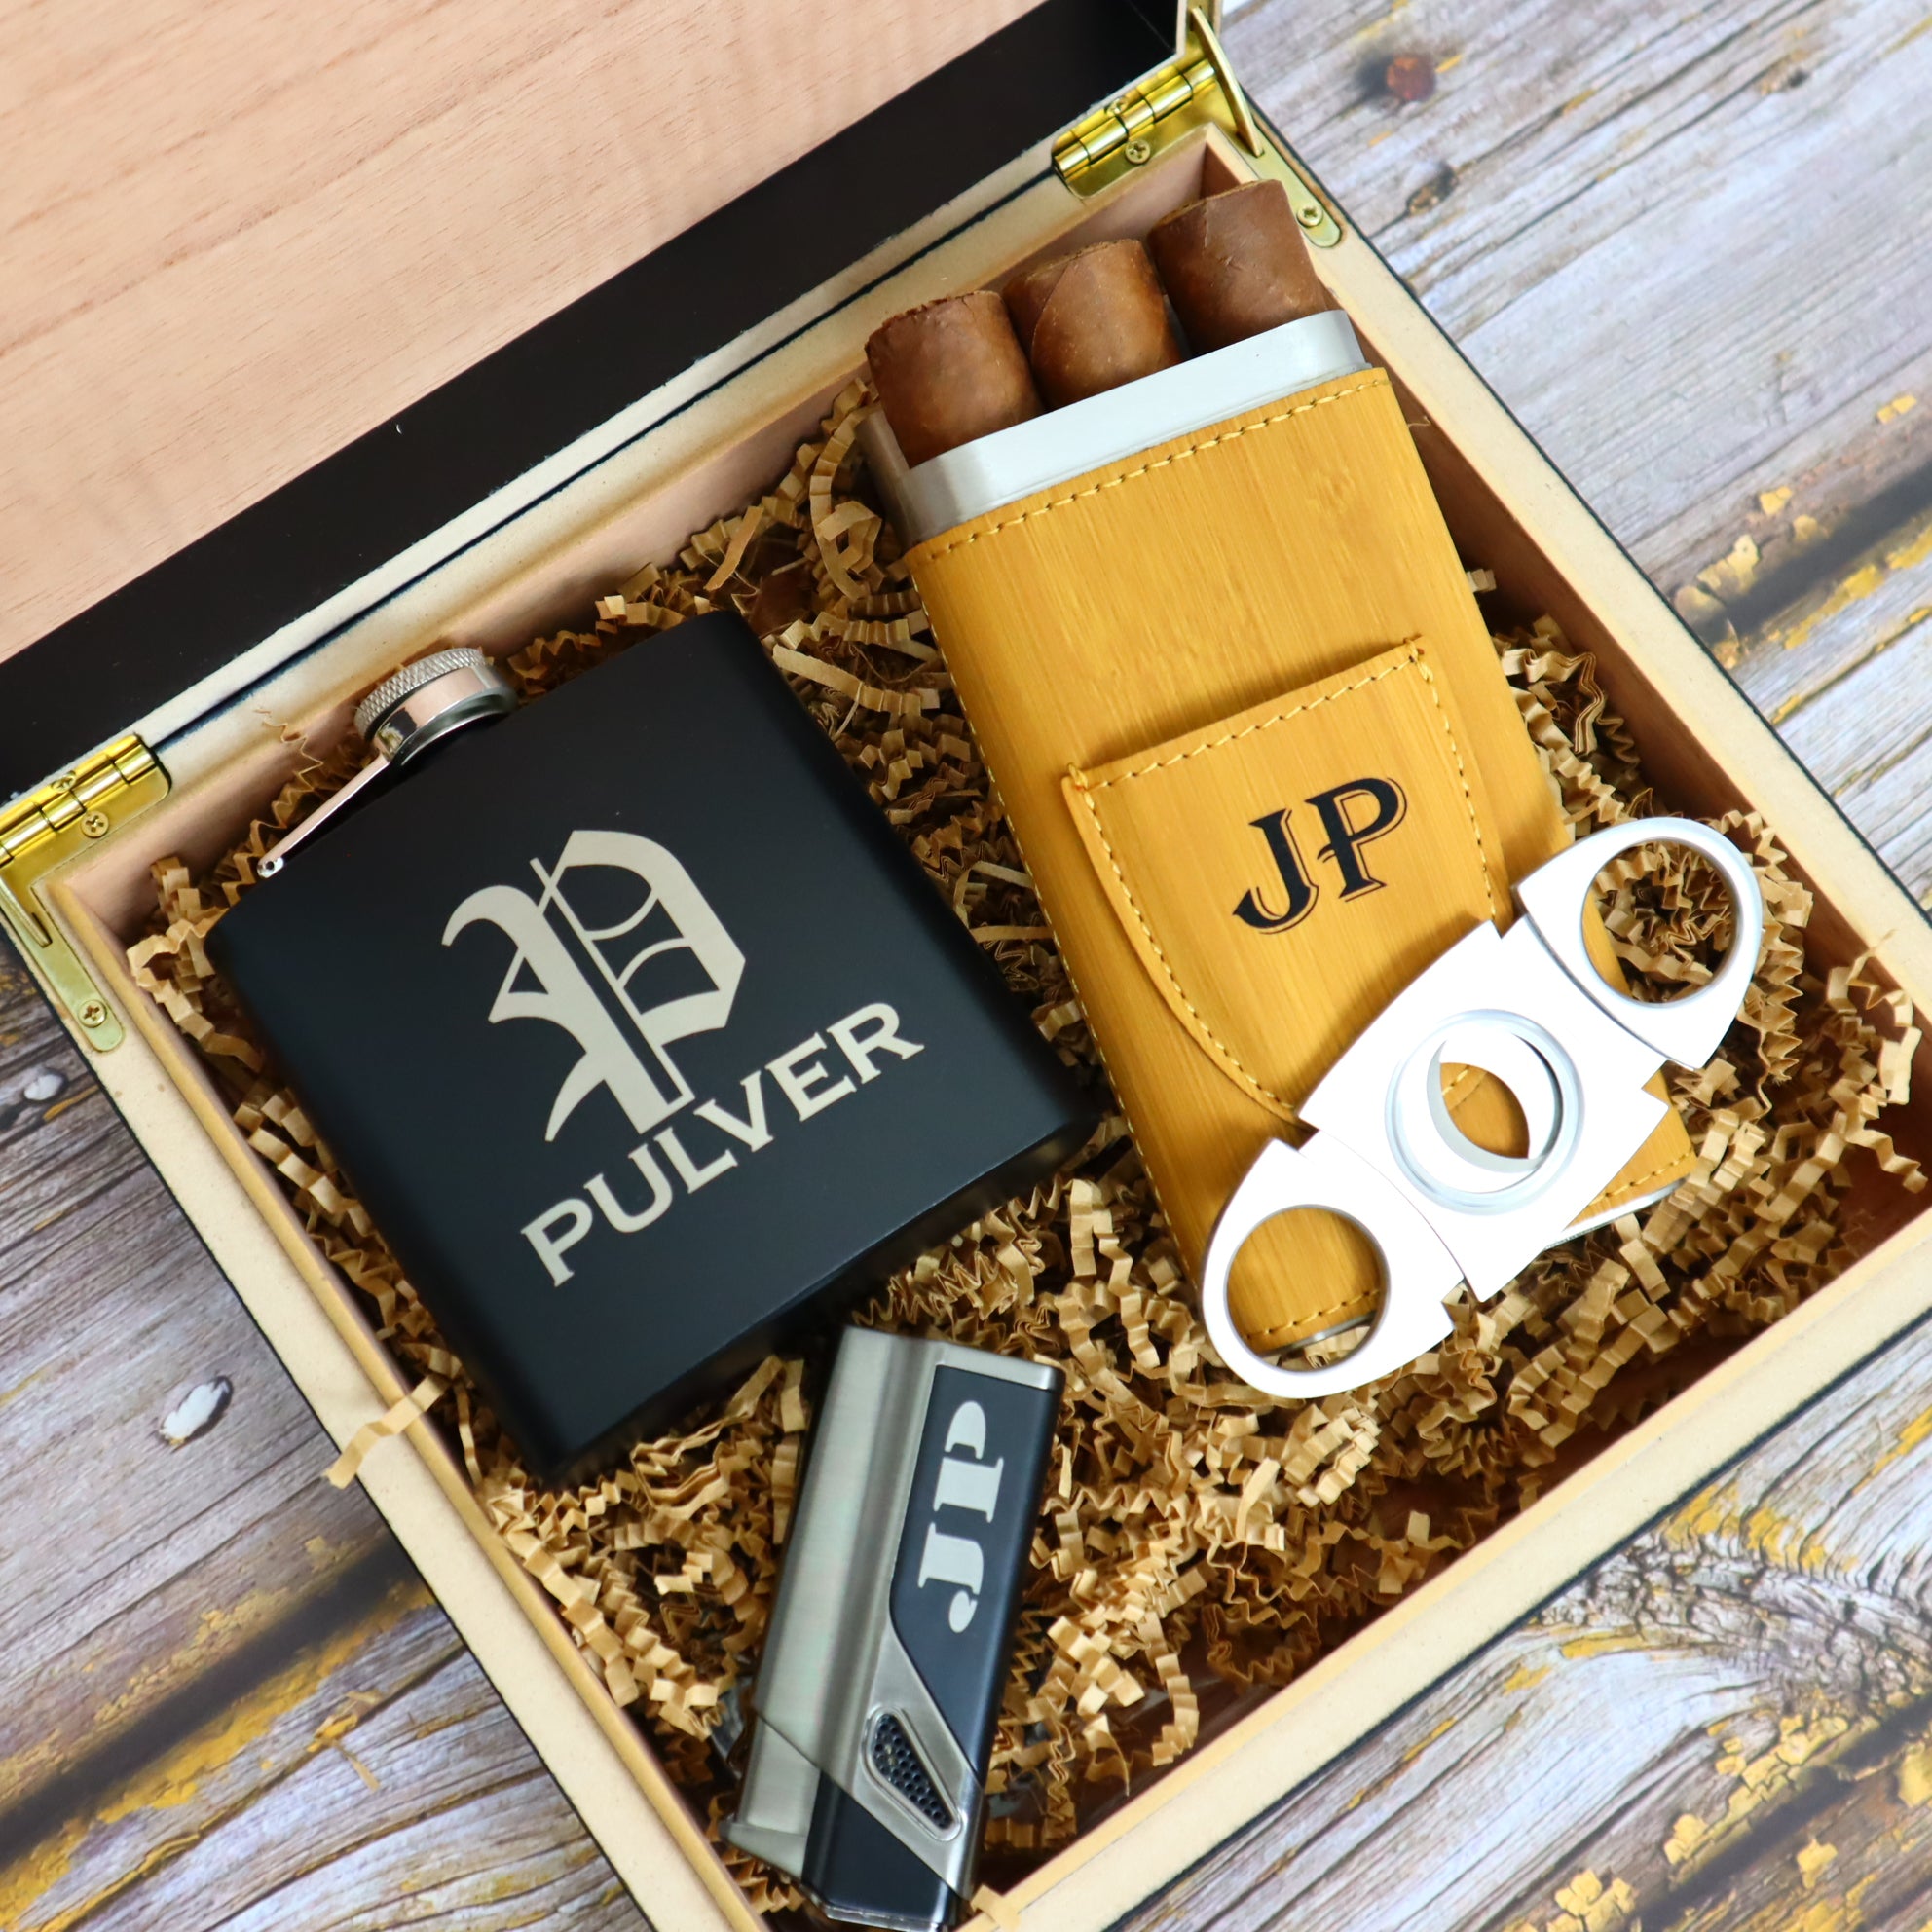 Retirement Golf Gift Box - Groovy Guy Gifts